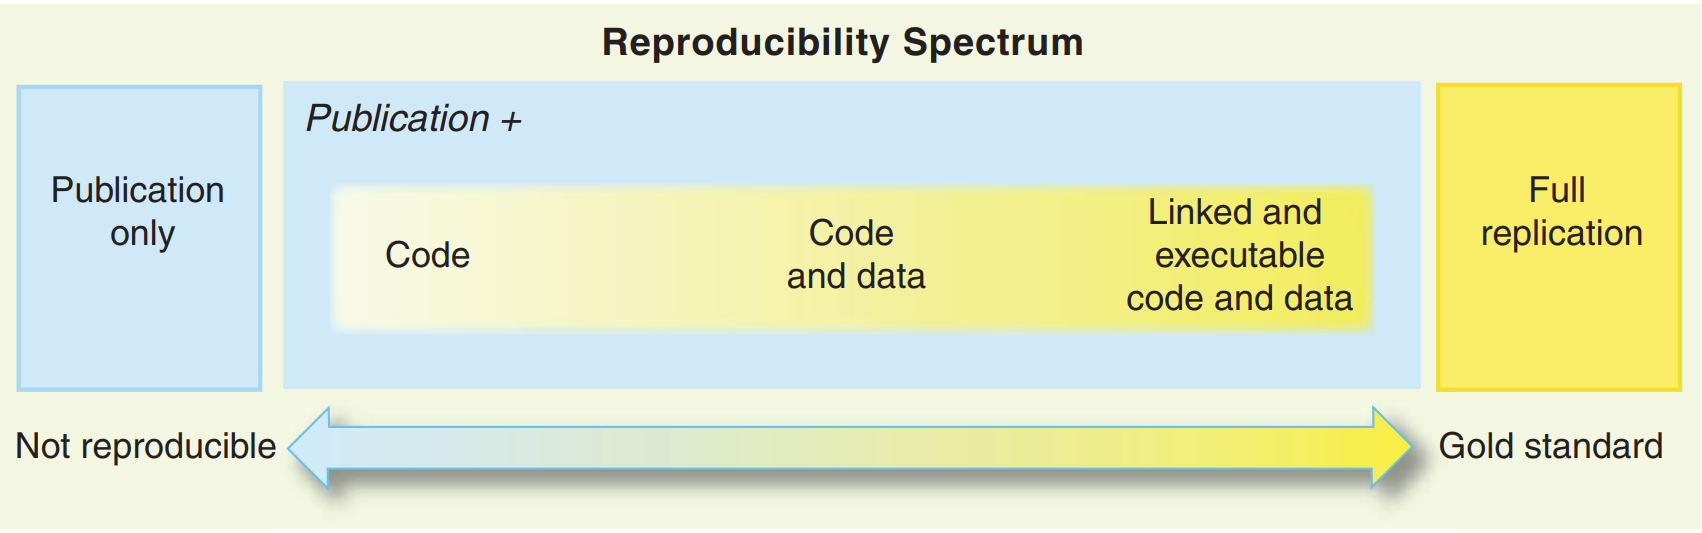 The reproducibility spectrum from Peng's 2011 paper.